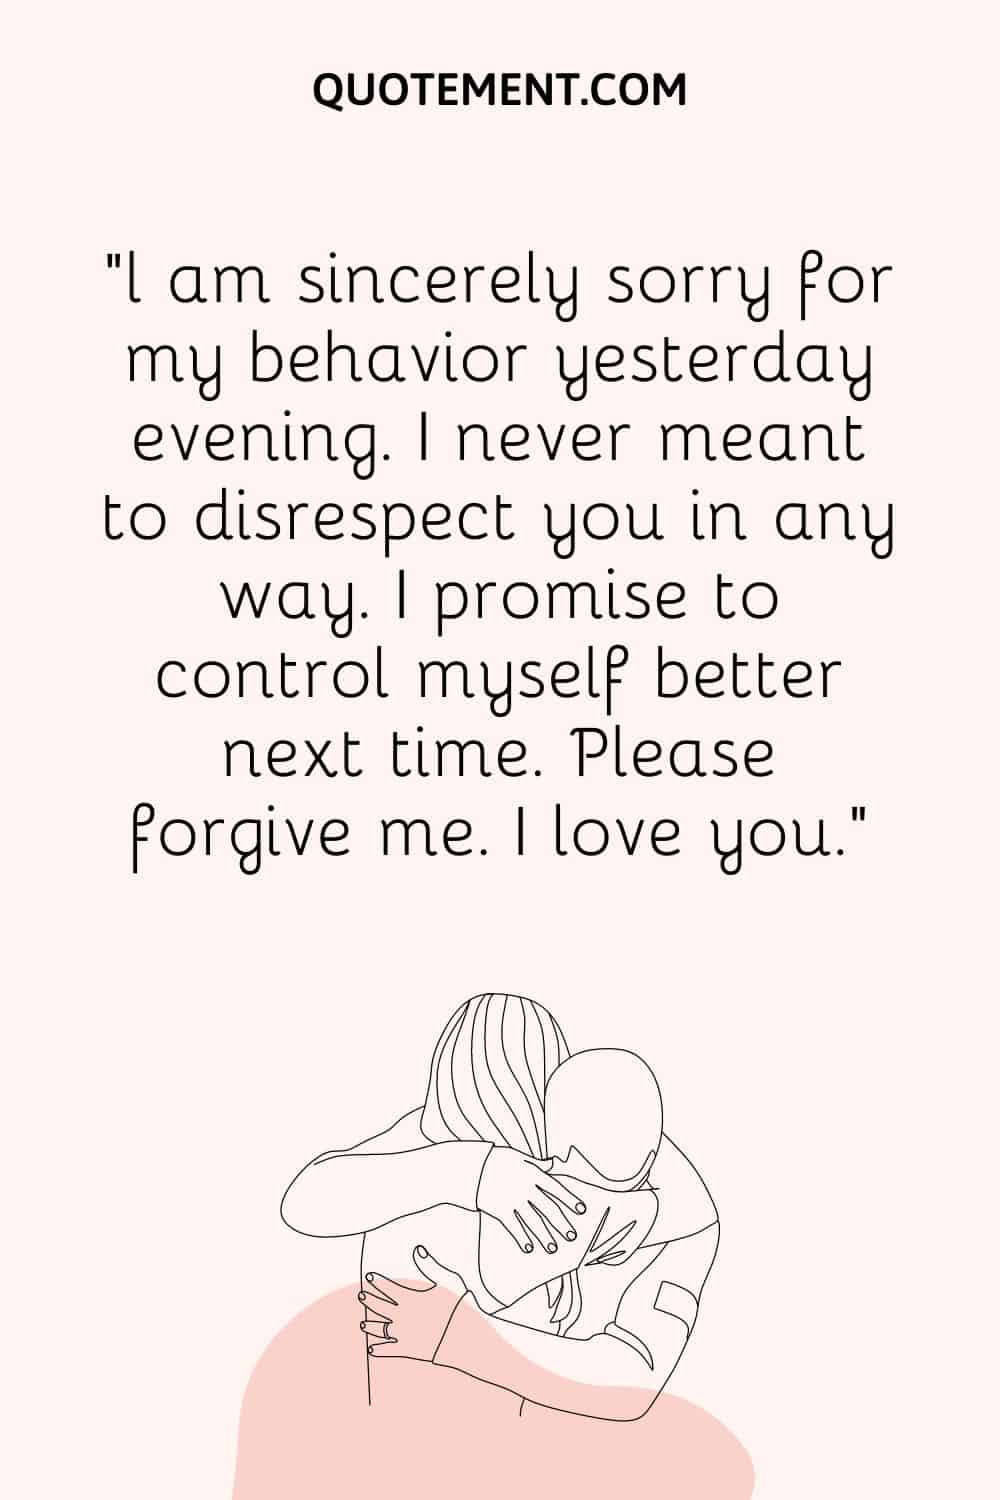 l am sincerely sorry for my behavior yesterday evening